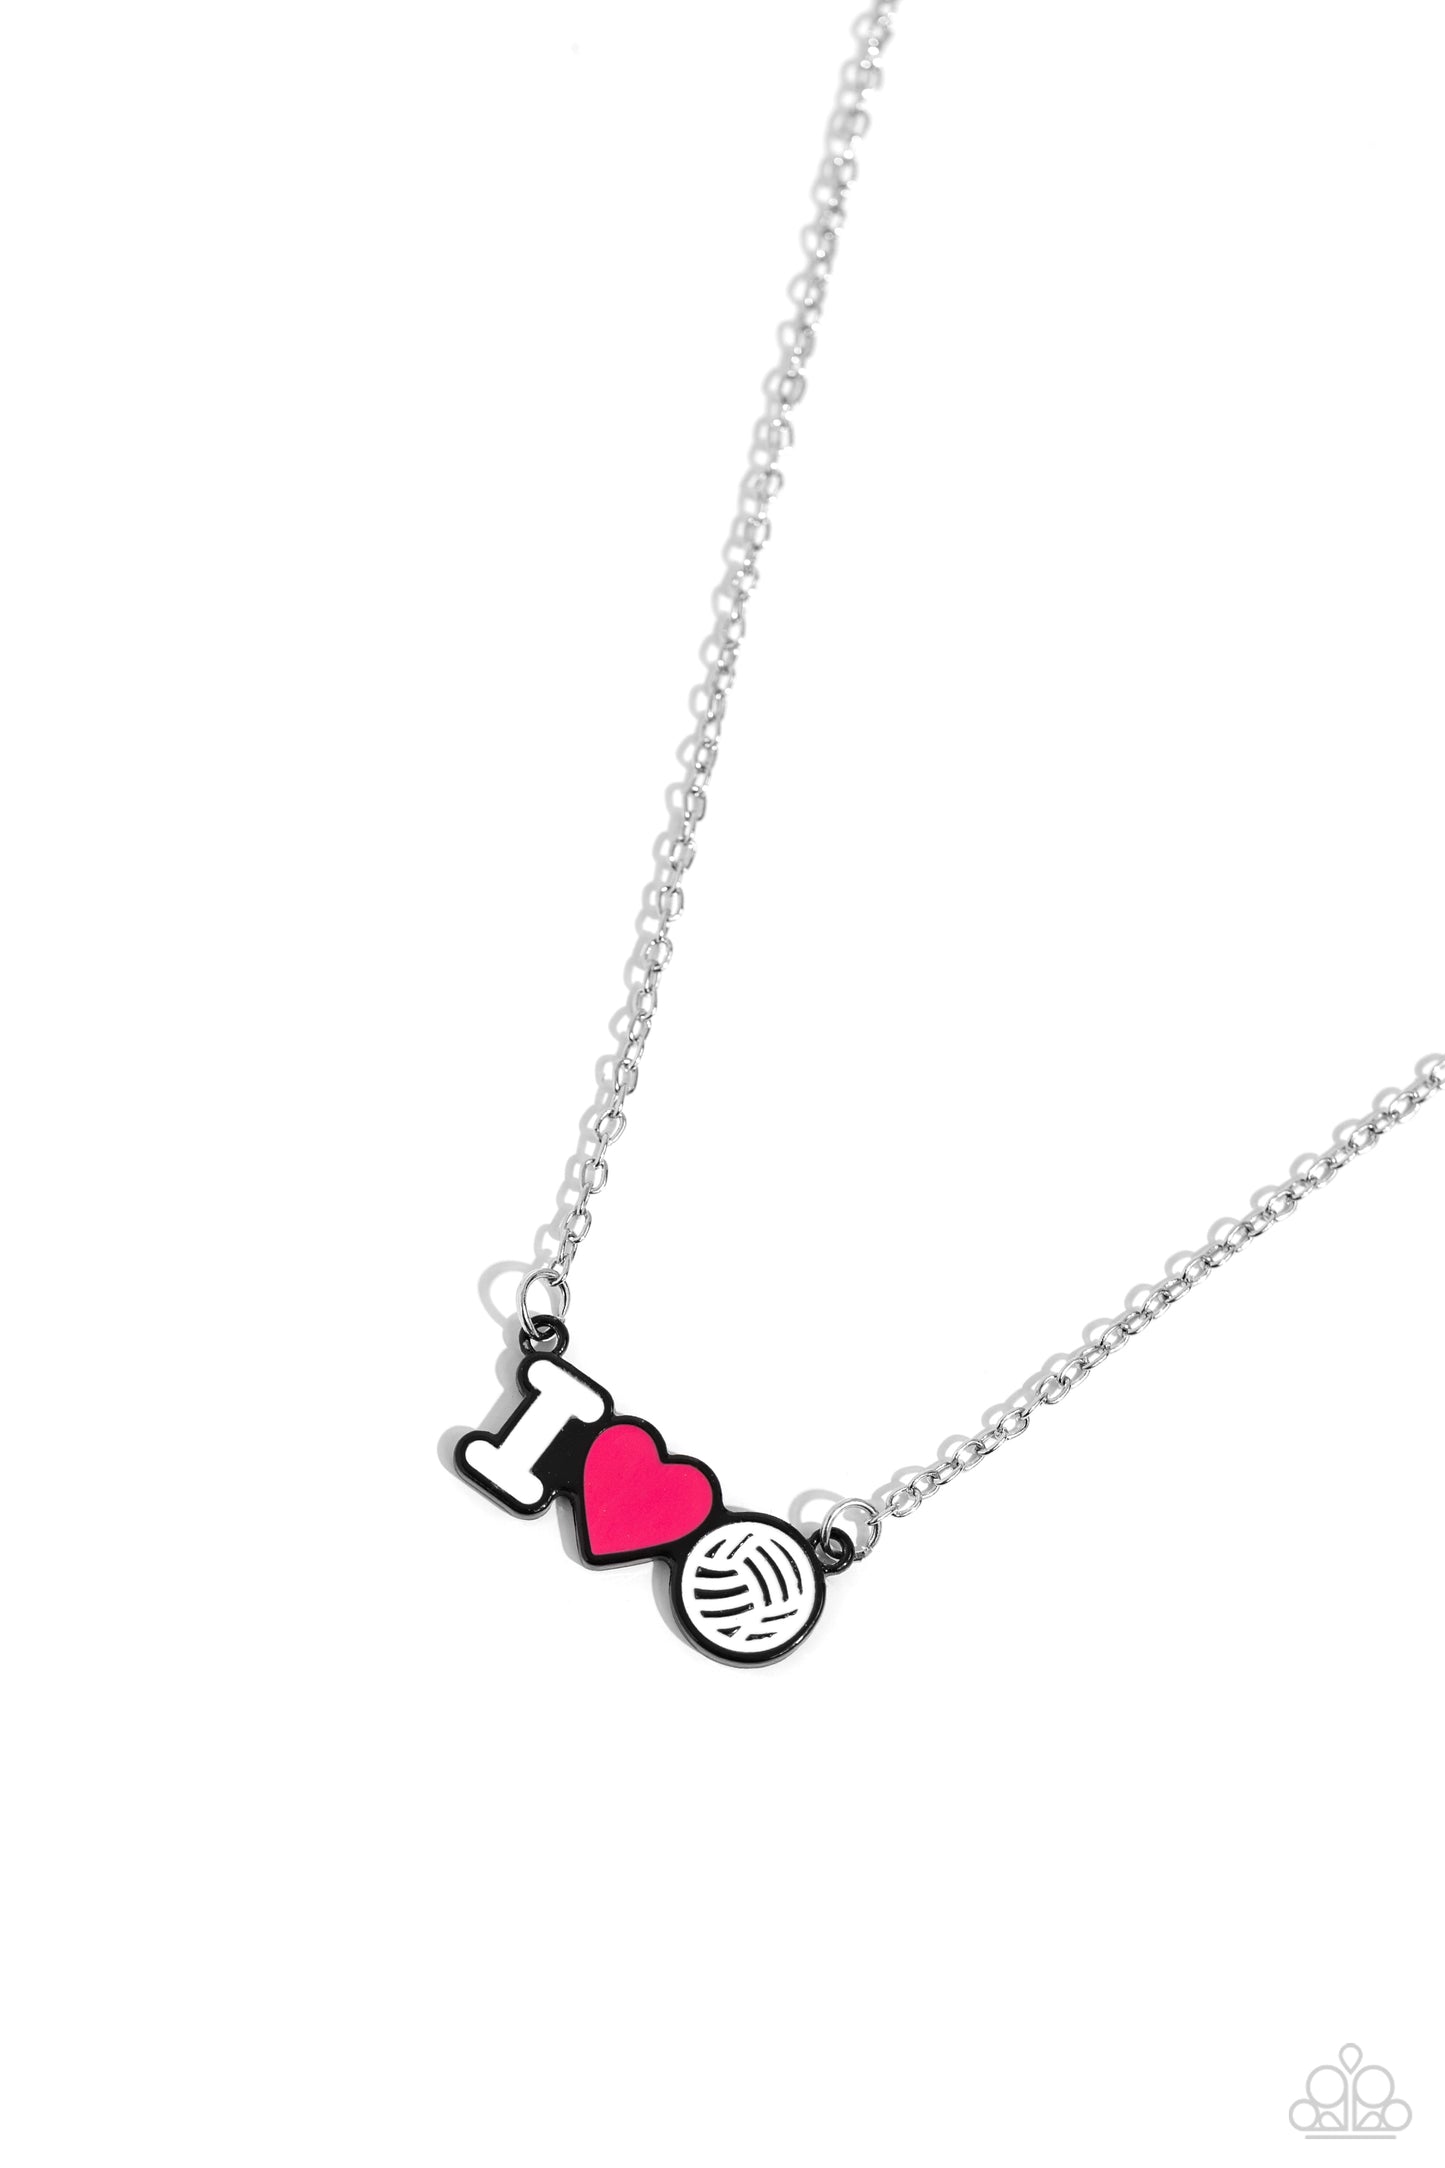 Meet Me at the Net - pink - Paparazzi necklace